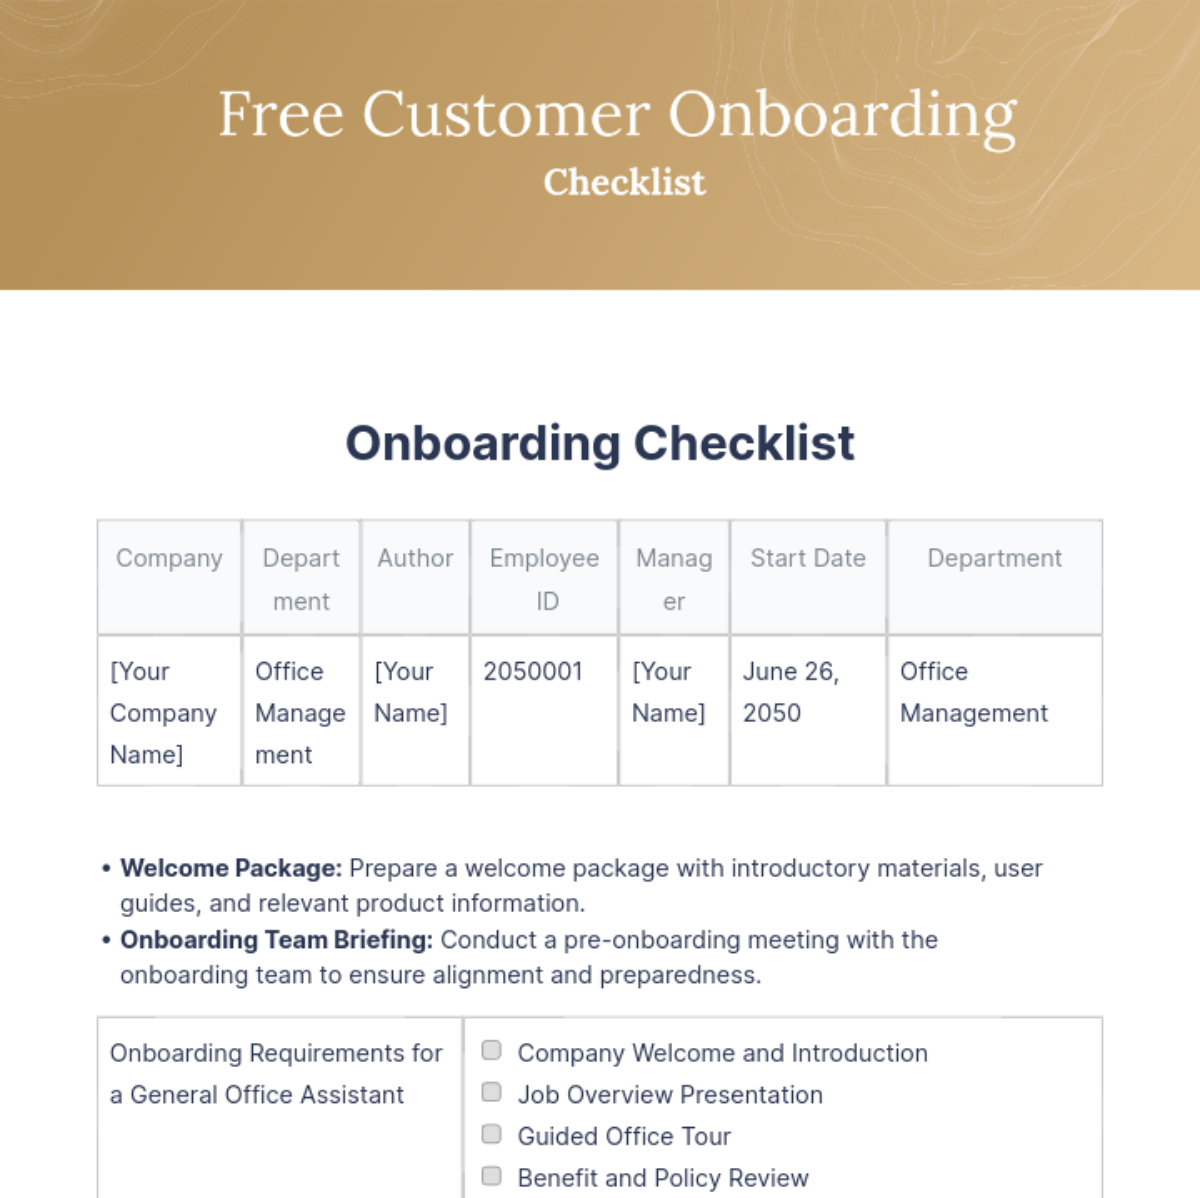 Free Customer Onboarding Checklist Template